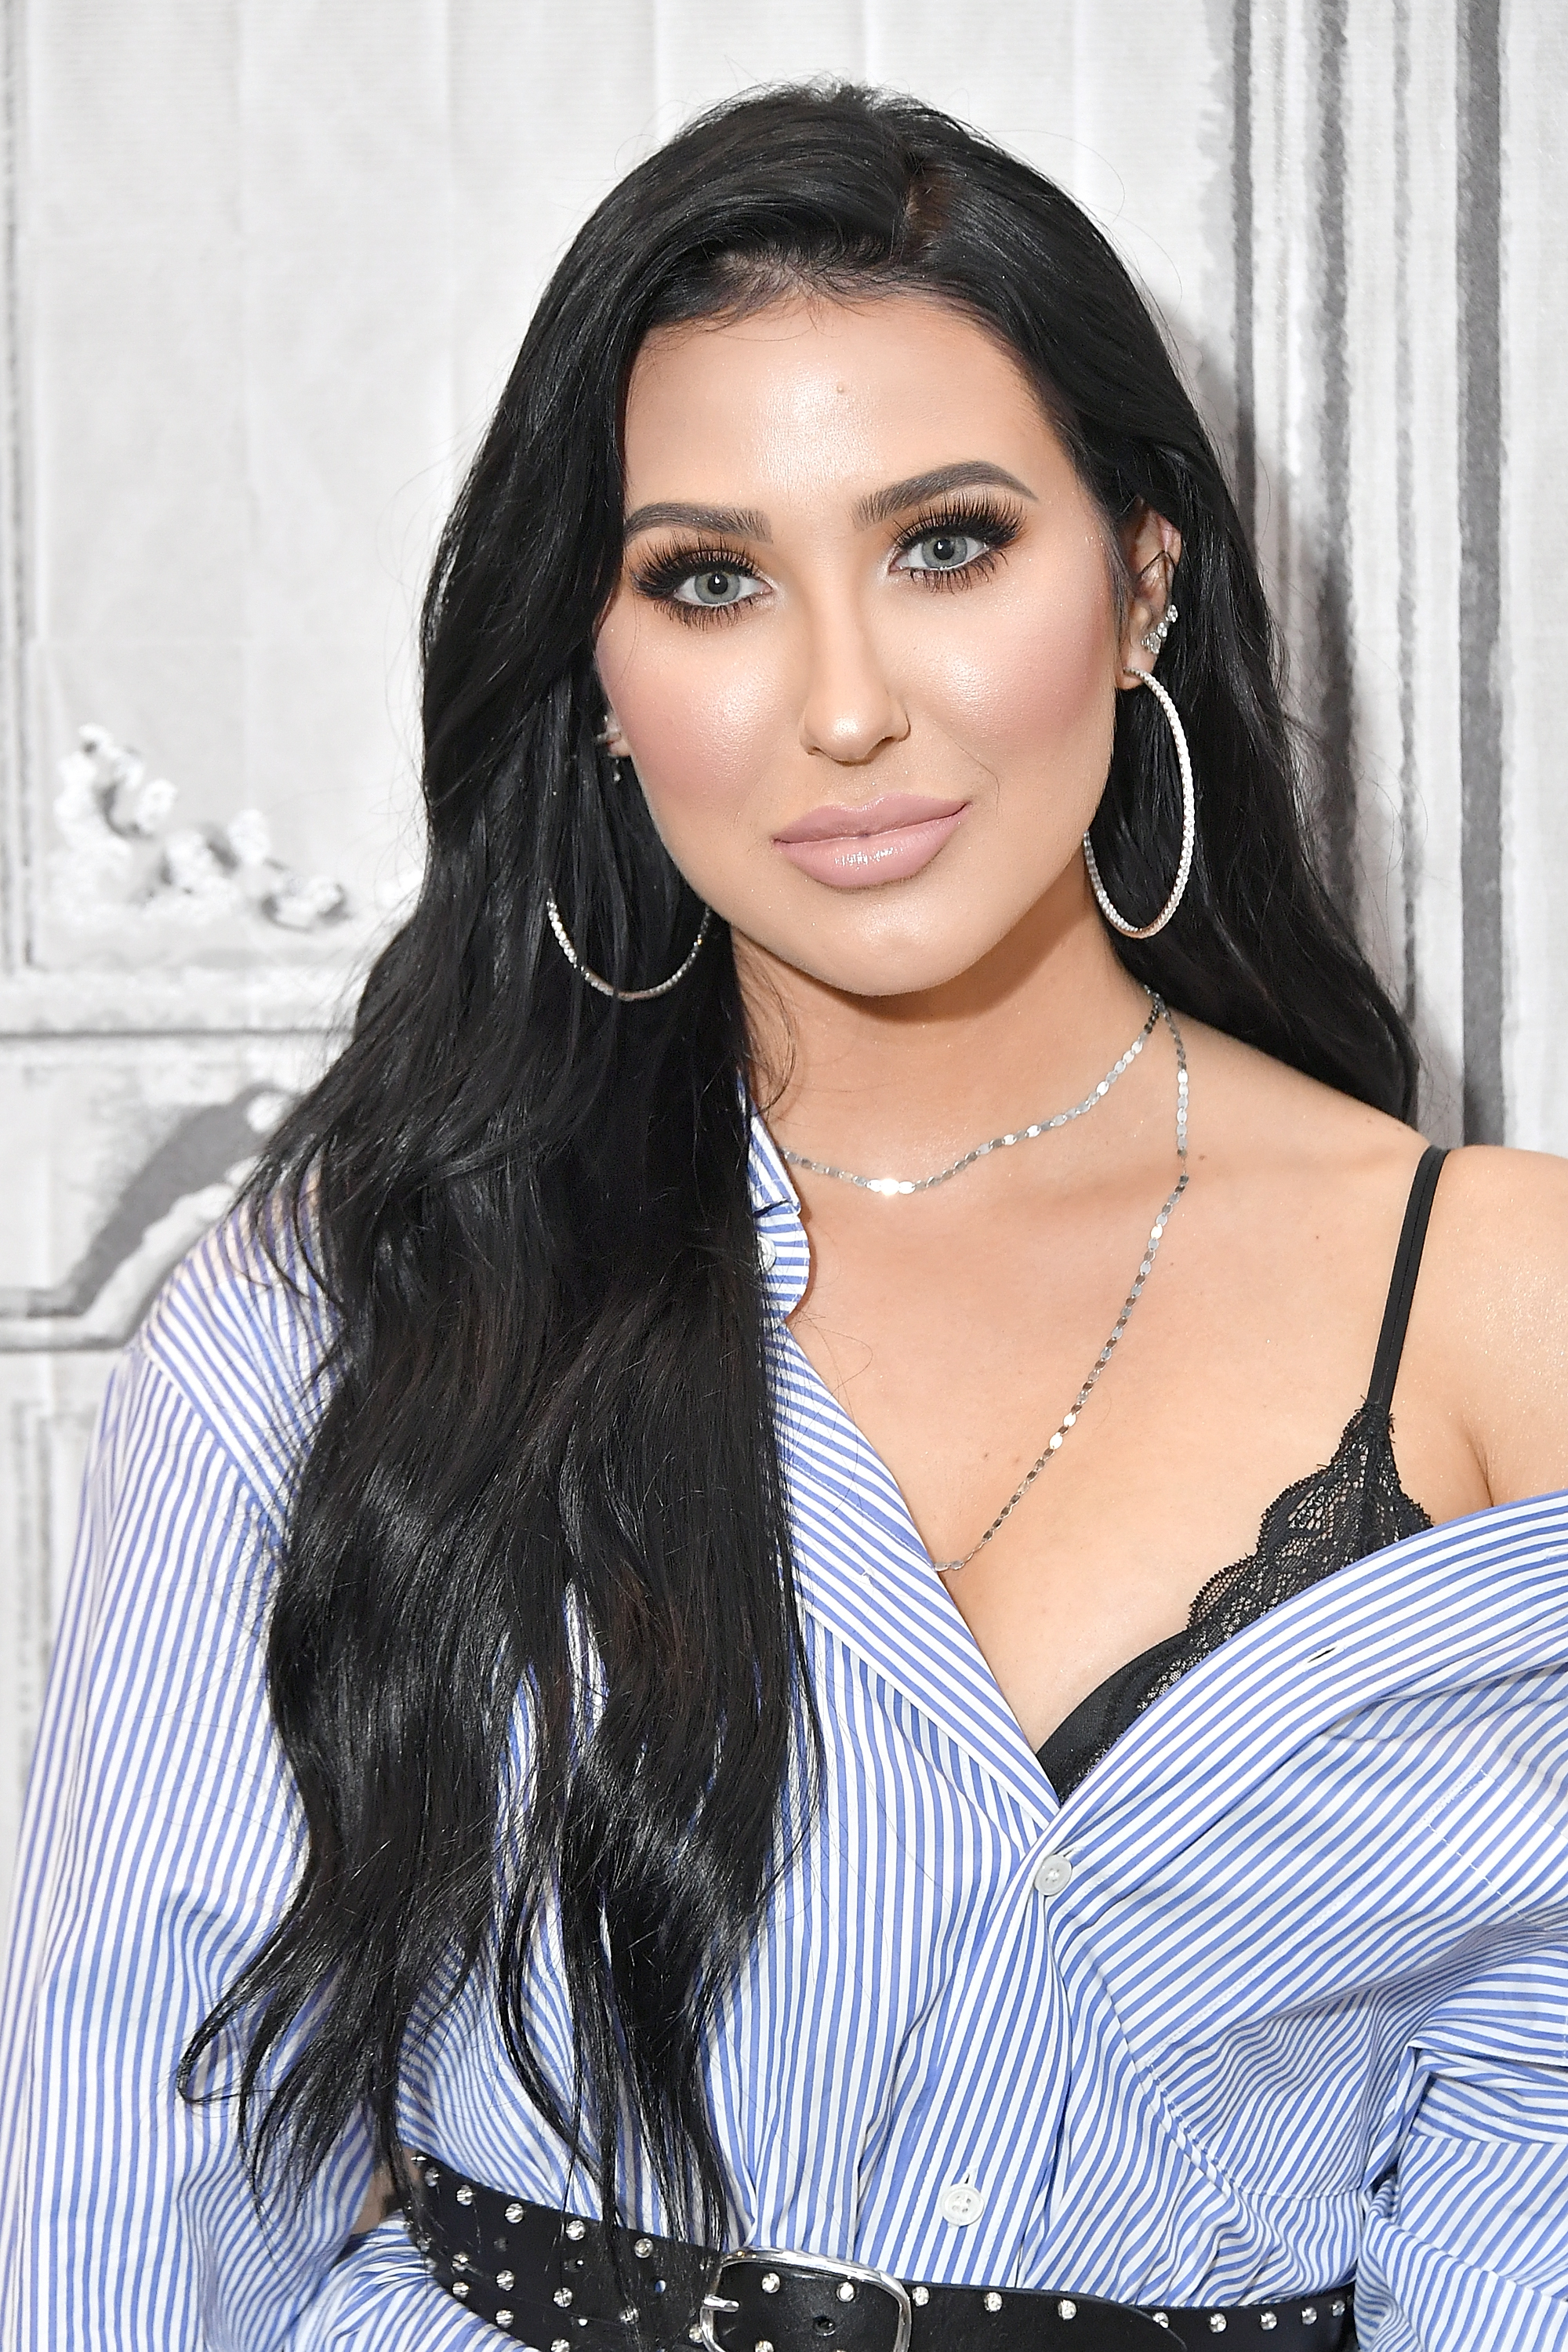 Beauty Influencer Jaclyn Hill Is Relaunching Her Makeup Collection